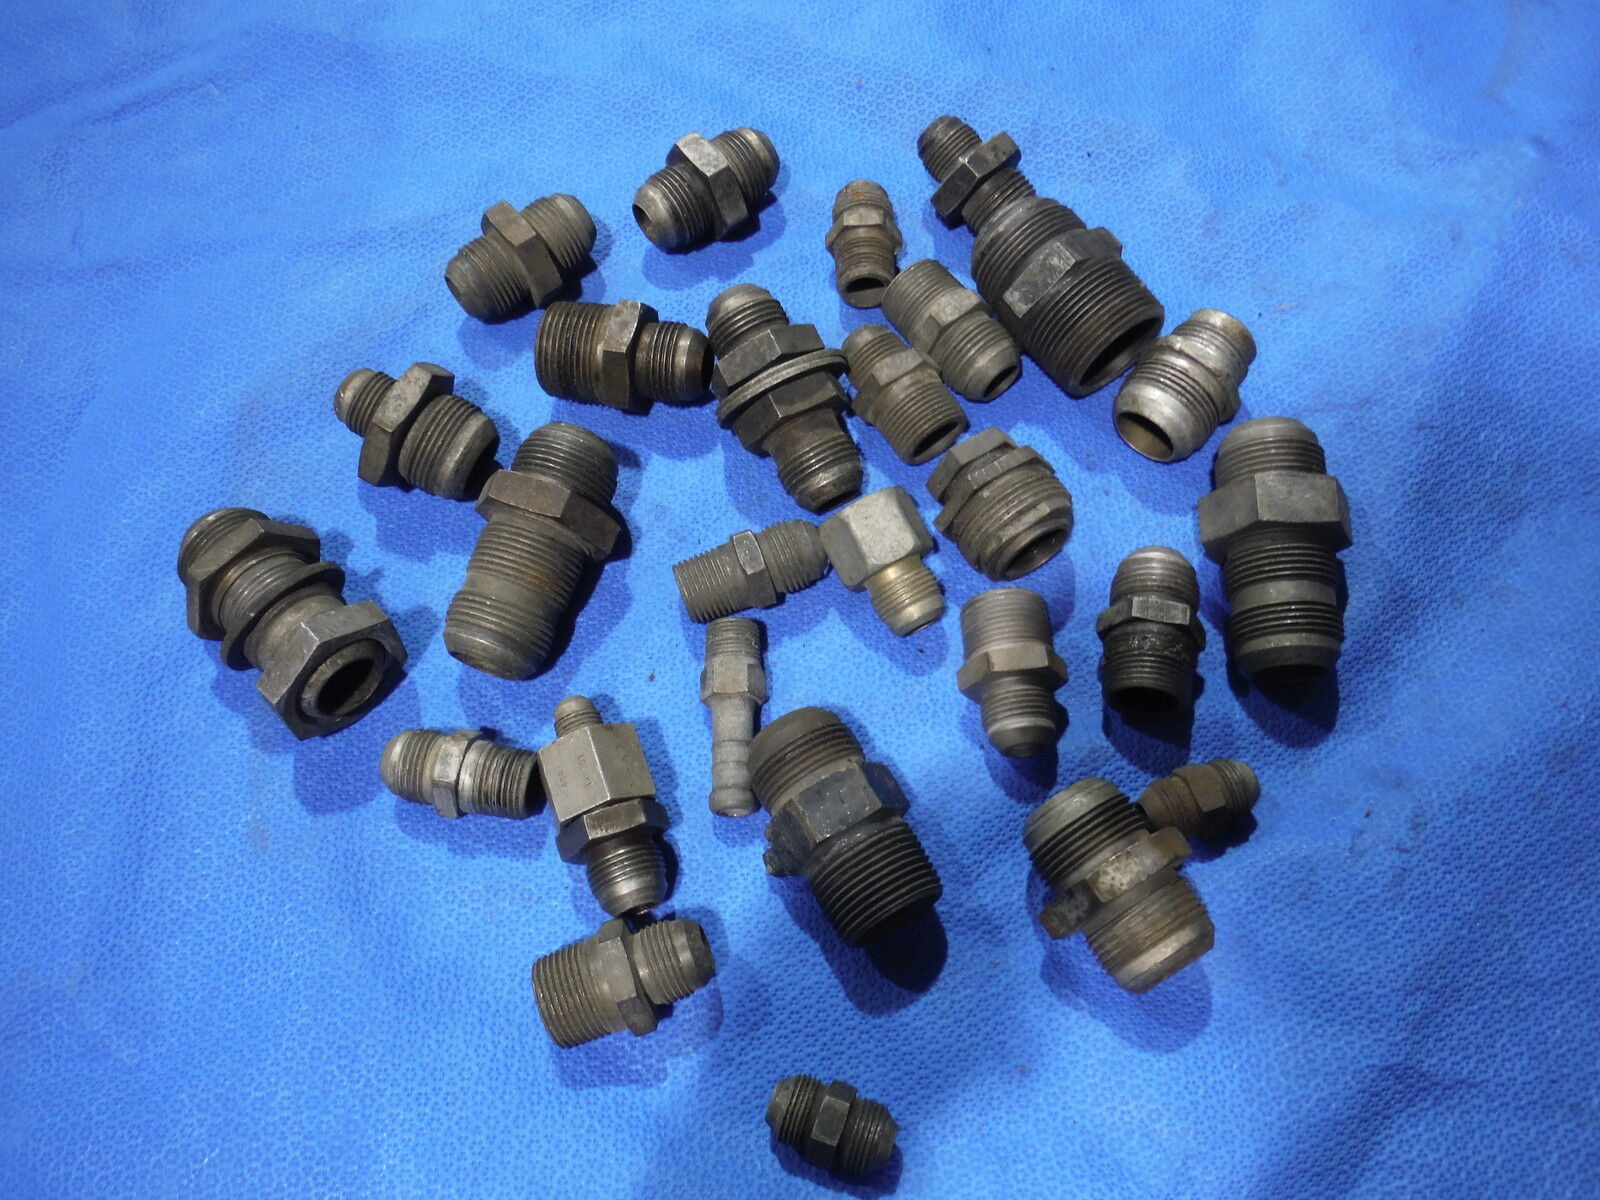 Misc. Steel Aircraft Fittings  SOLD AS ONE LOT ONLY  (715-97)